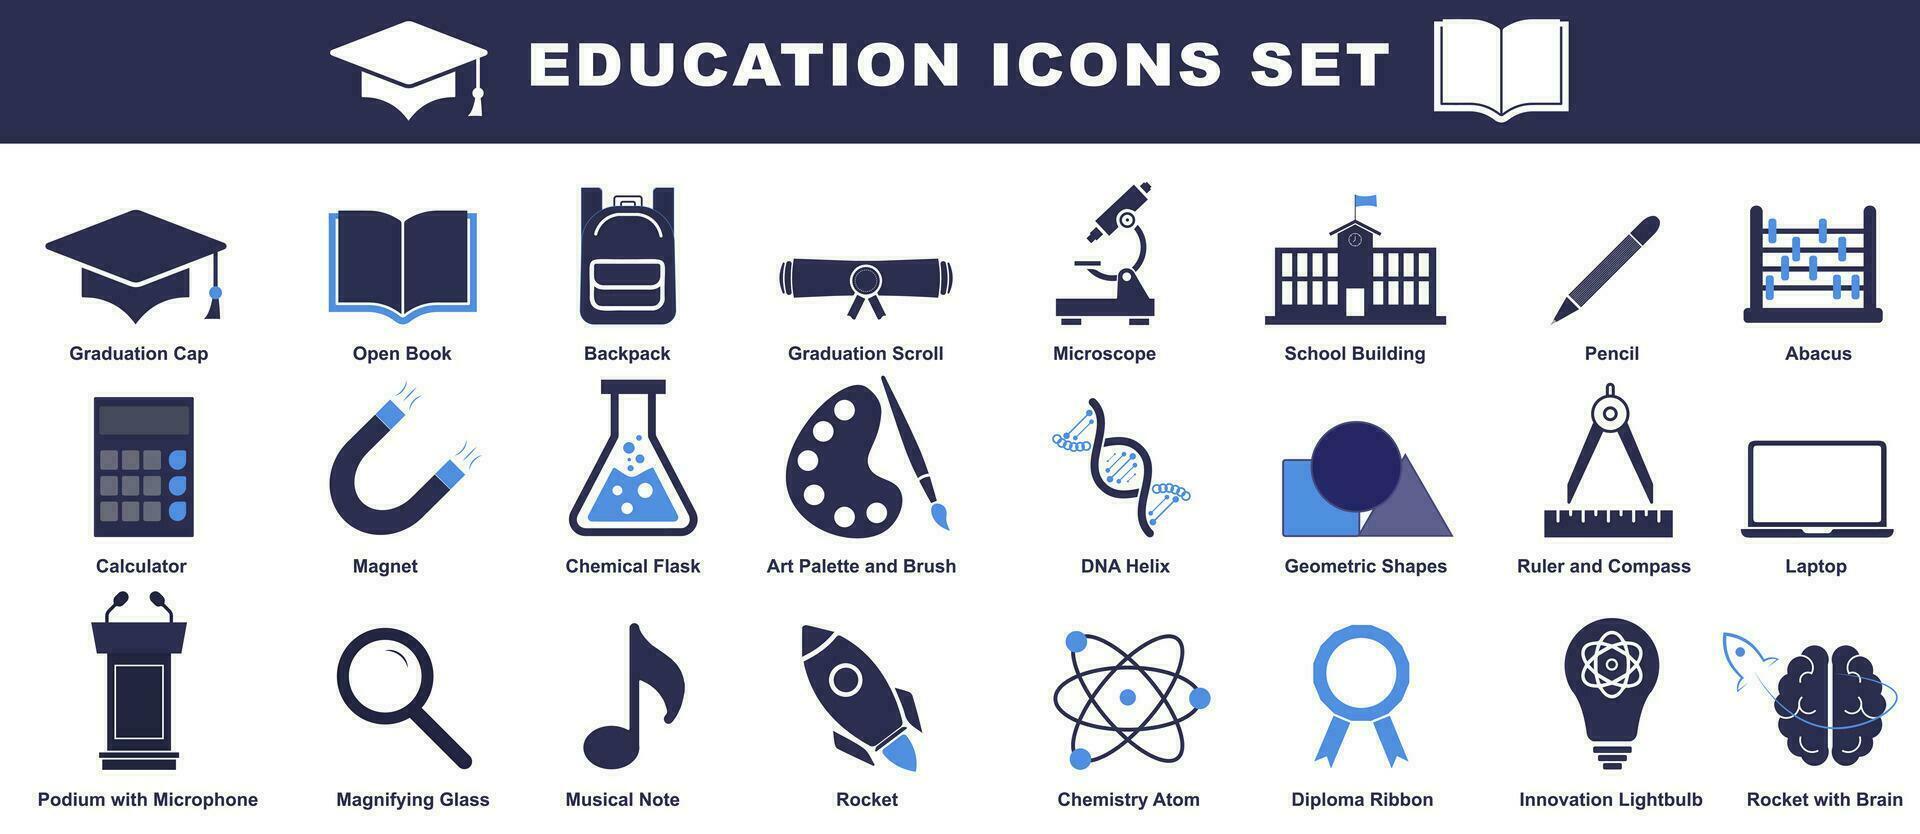 Set of Education and Learning icons - School, university, textbook, learning, success, academic subjects and more - Vector illustration icons collection